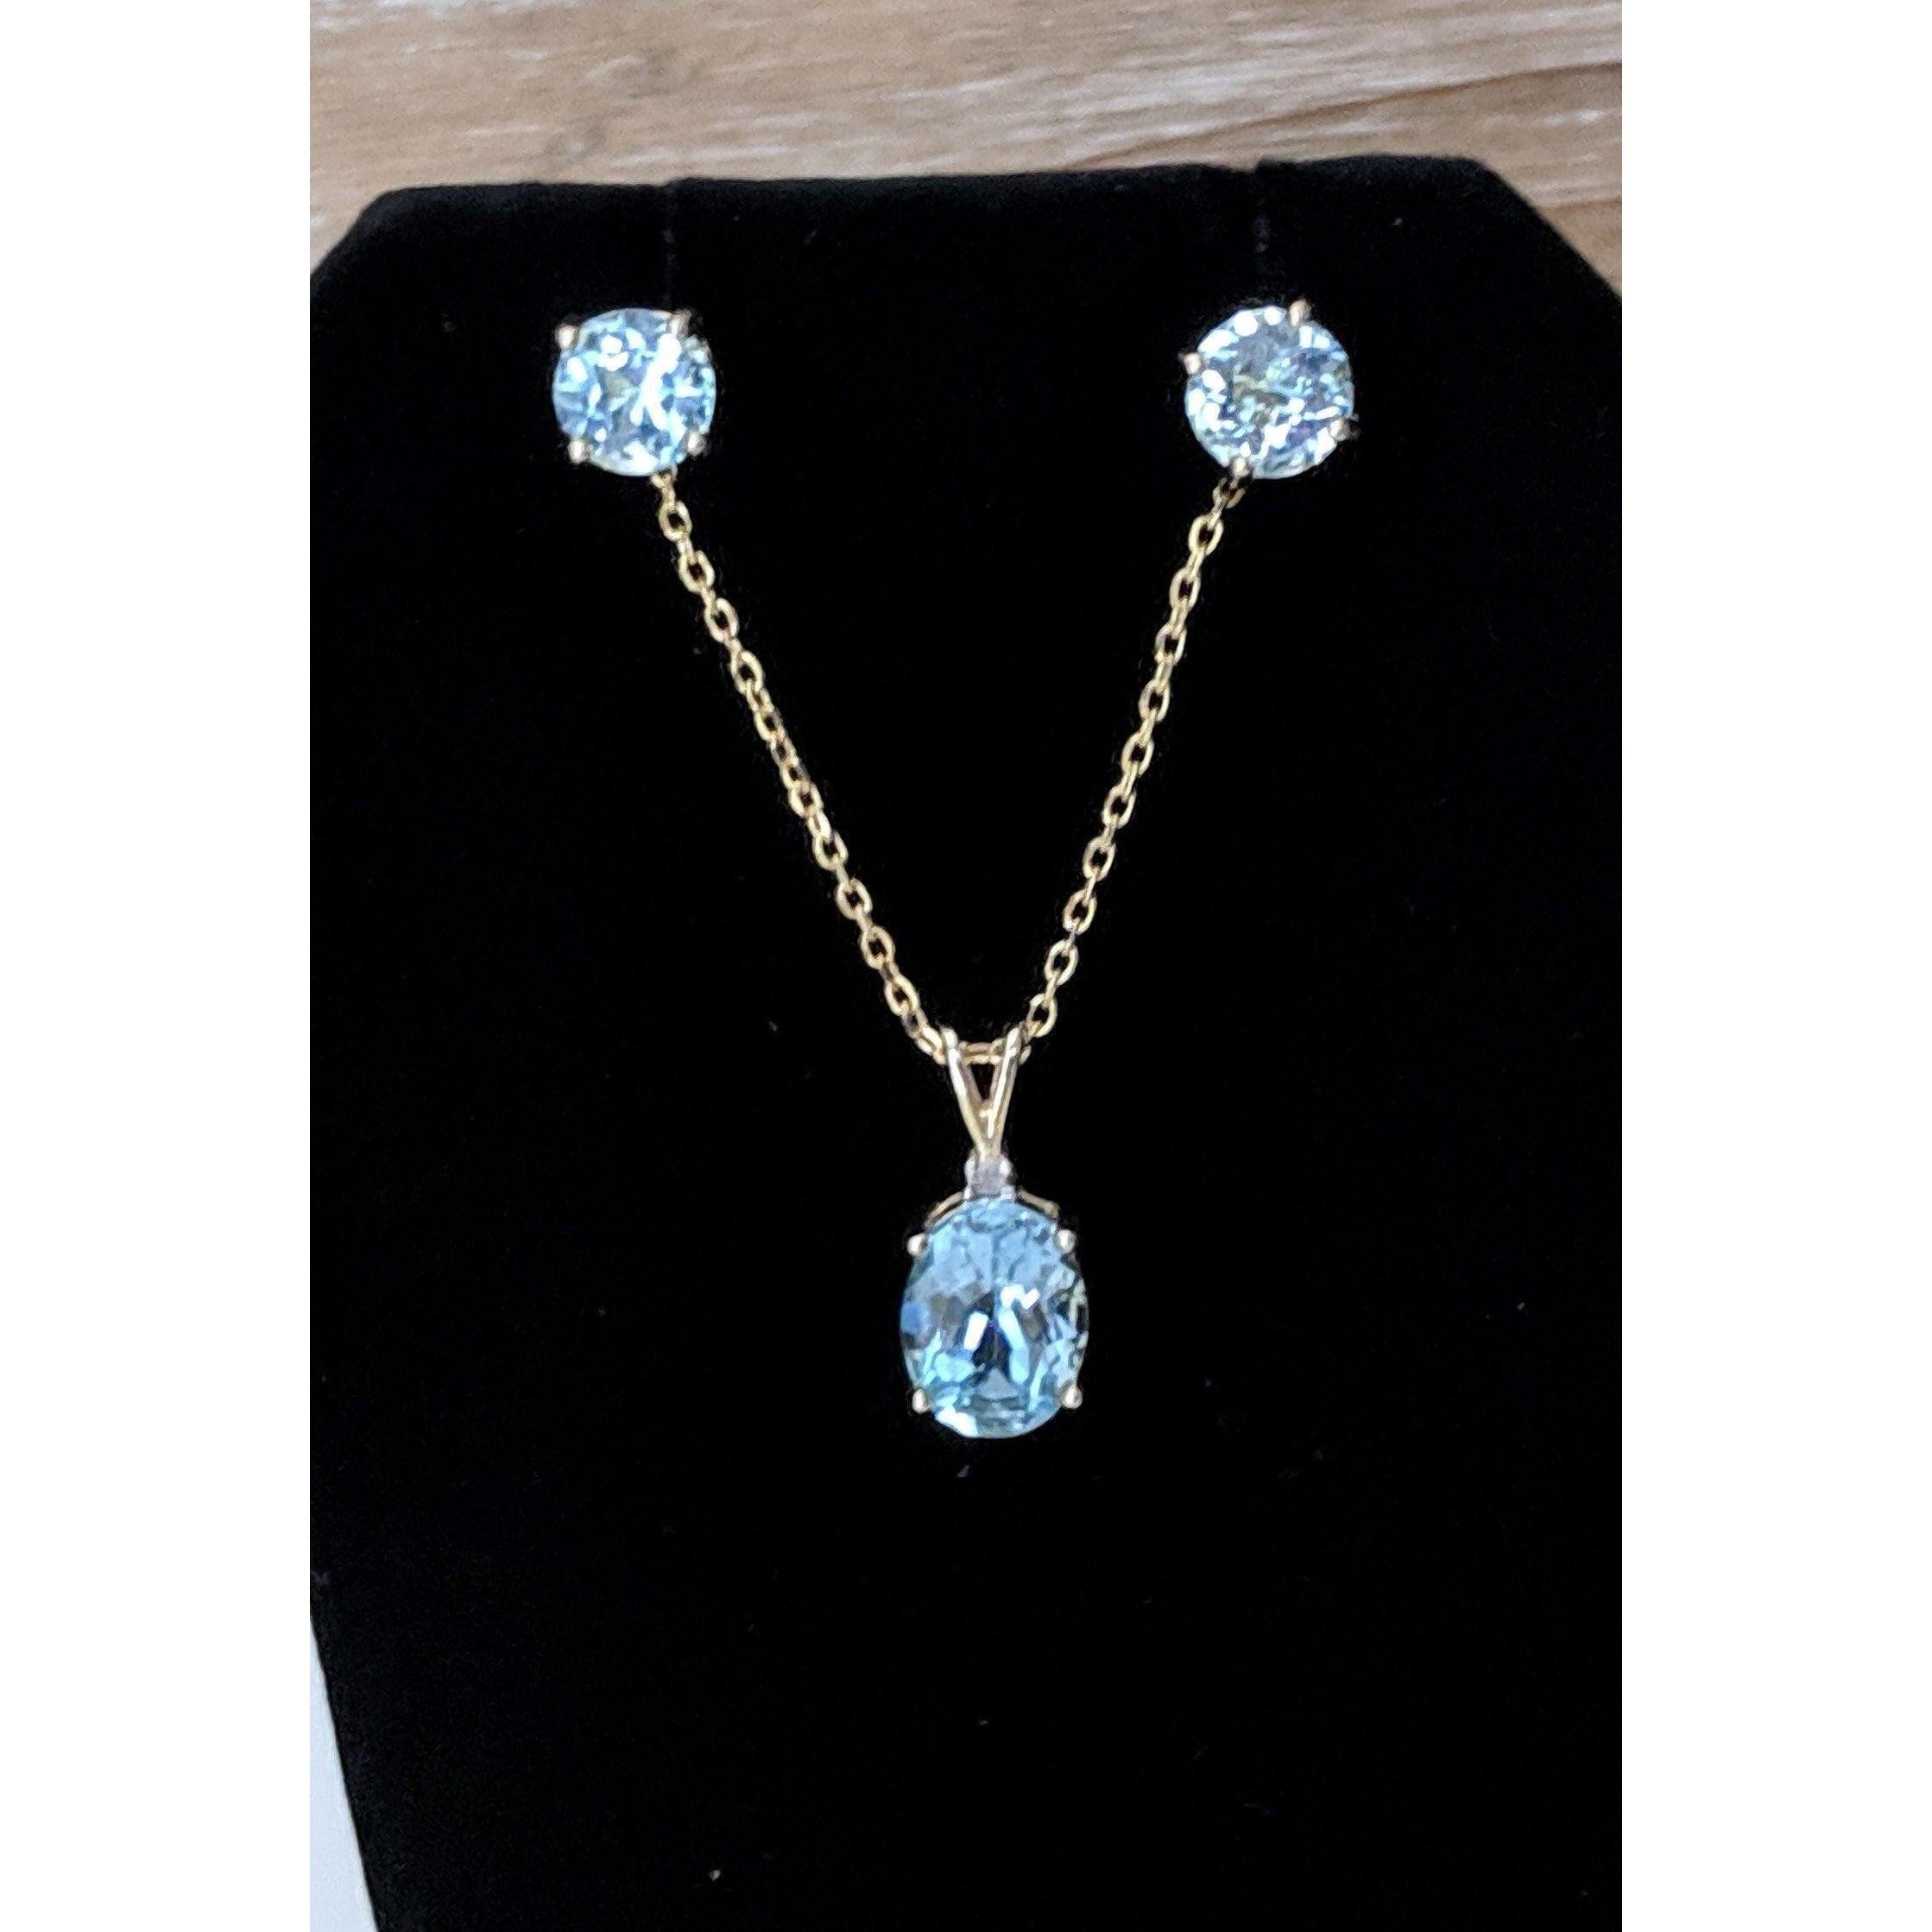 Blue Topaz Earrings and Necklace Set in Sterling Silver-50% off Retail! - The Pink Pigs, A Compassionate Boutique